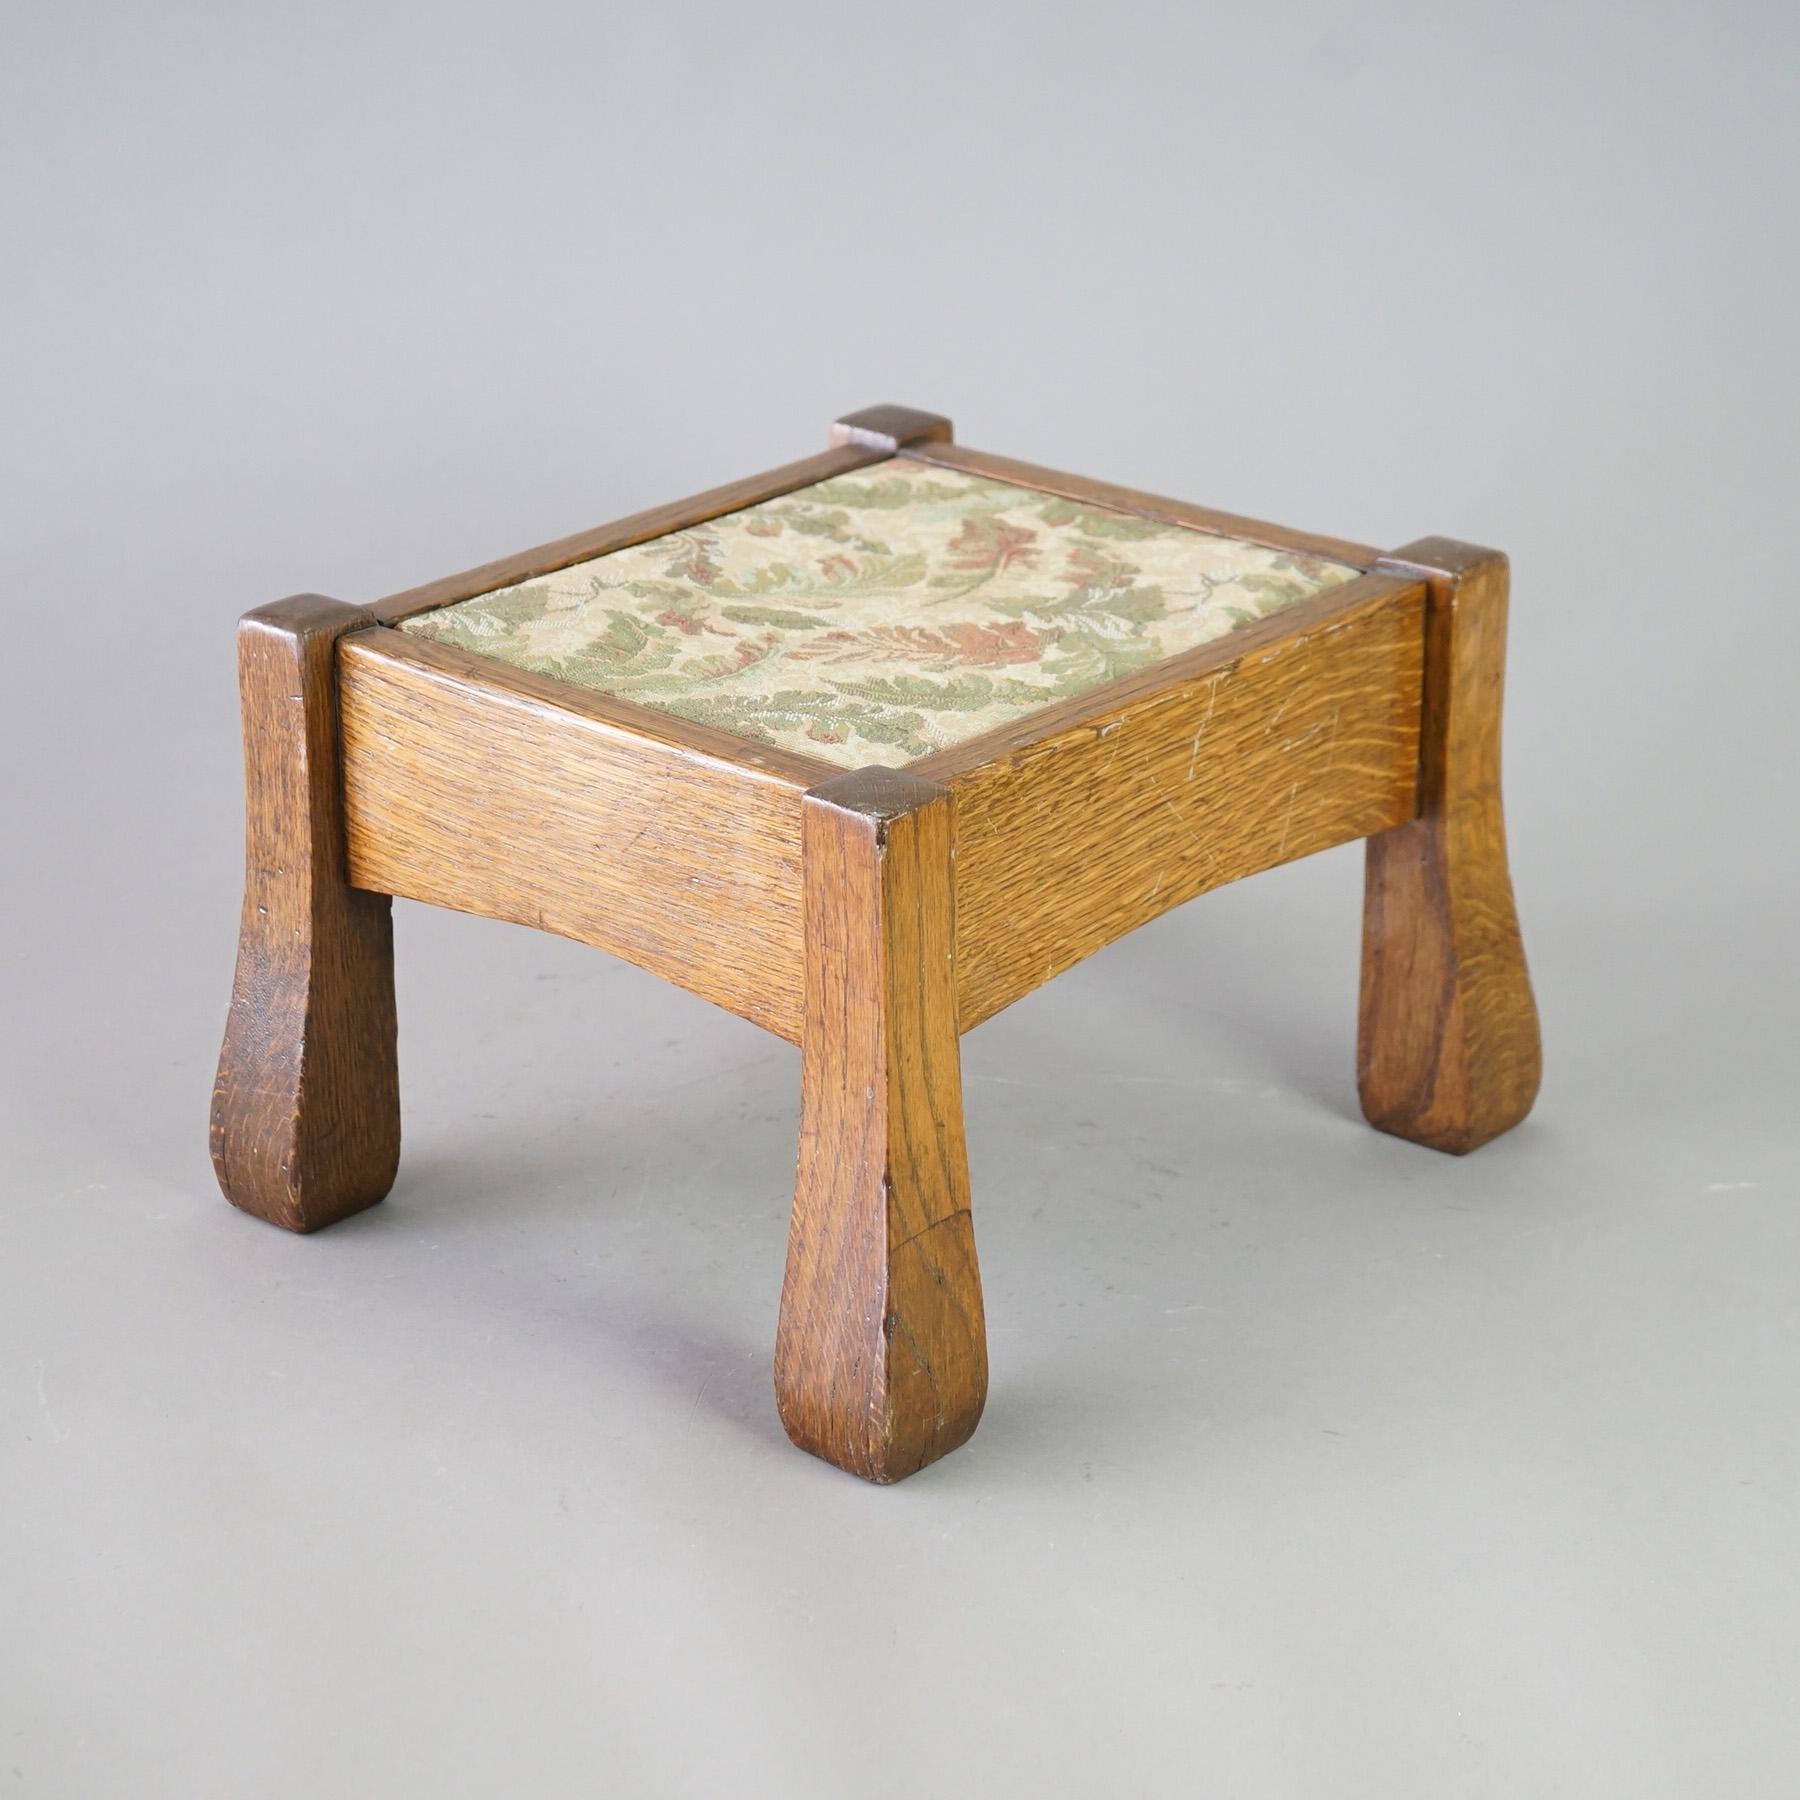 An antique Arts and Crafts footstool attributed to Stickley offers upholstered seat on quarter sawn frame and raised on flared legs, unsigned, c1910

Measures - 10